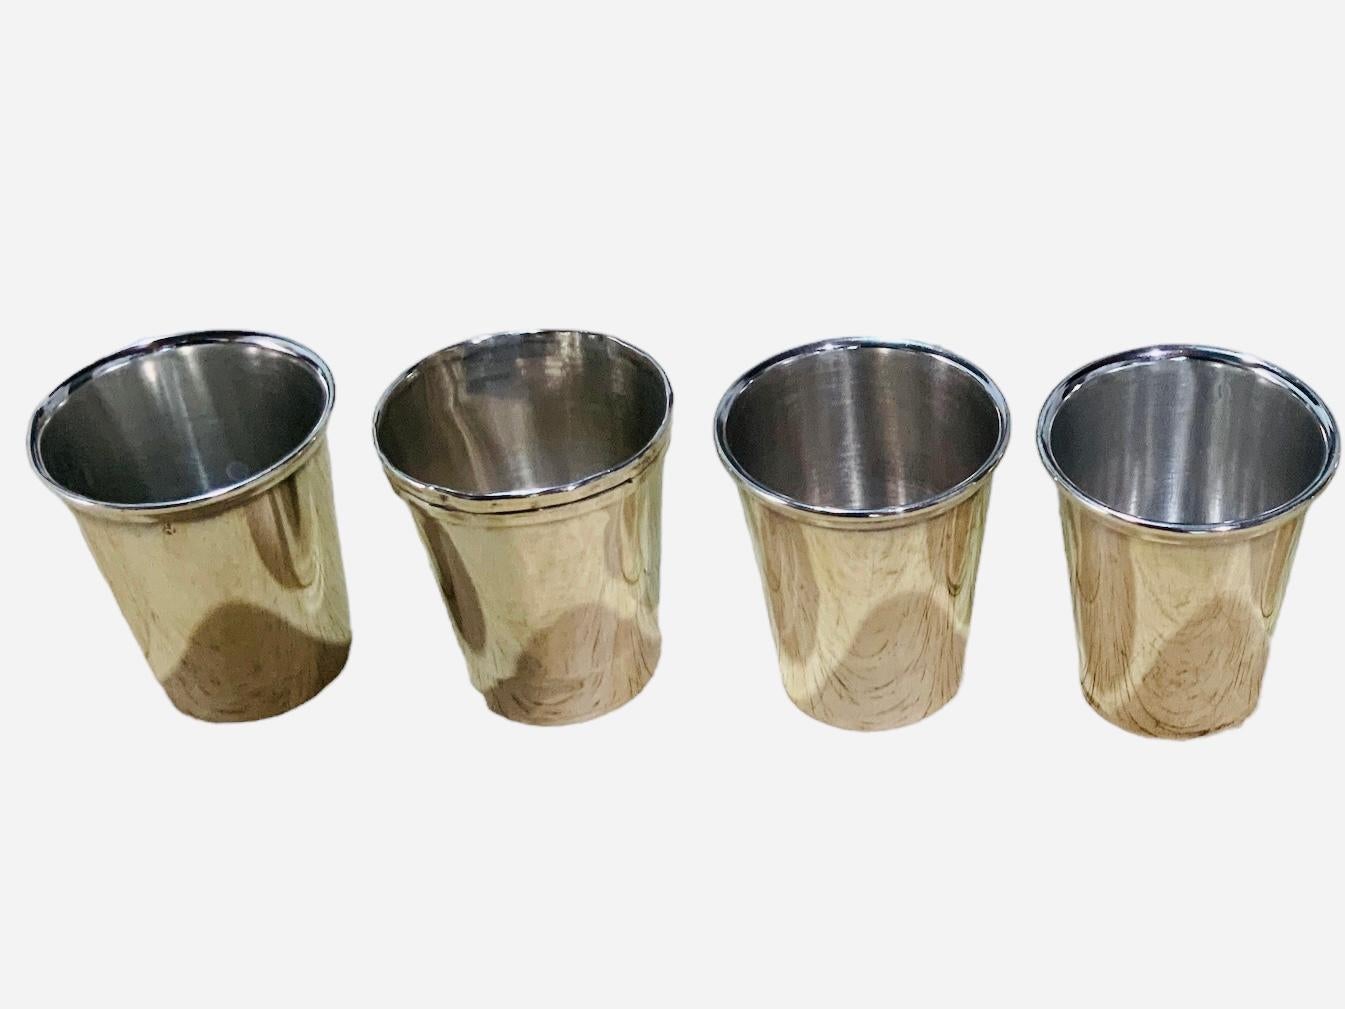 Spaniard Set Of Four Silver Shot Glasses In Good Condition For Sale In Guaynabo, PR